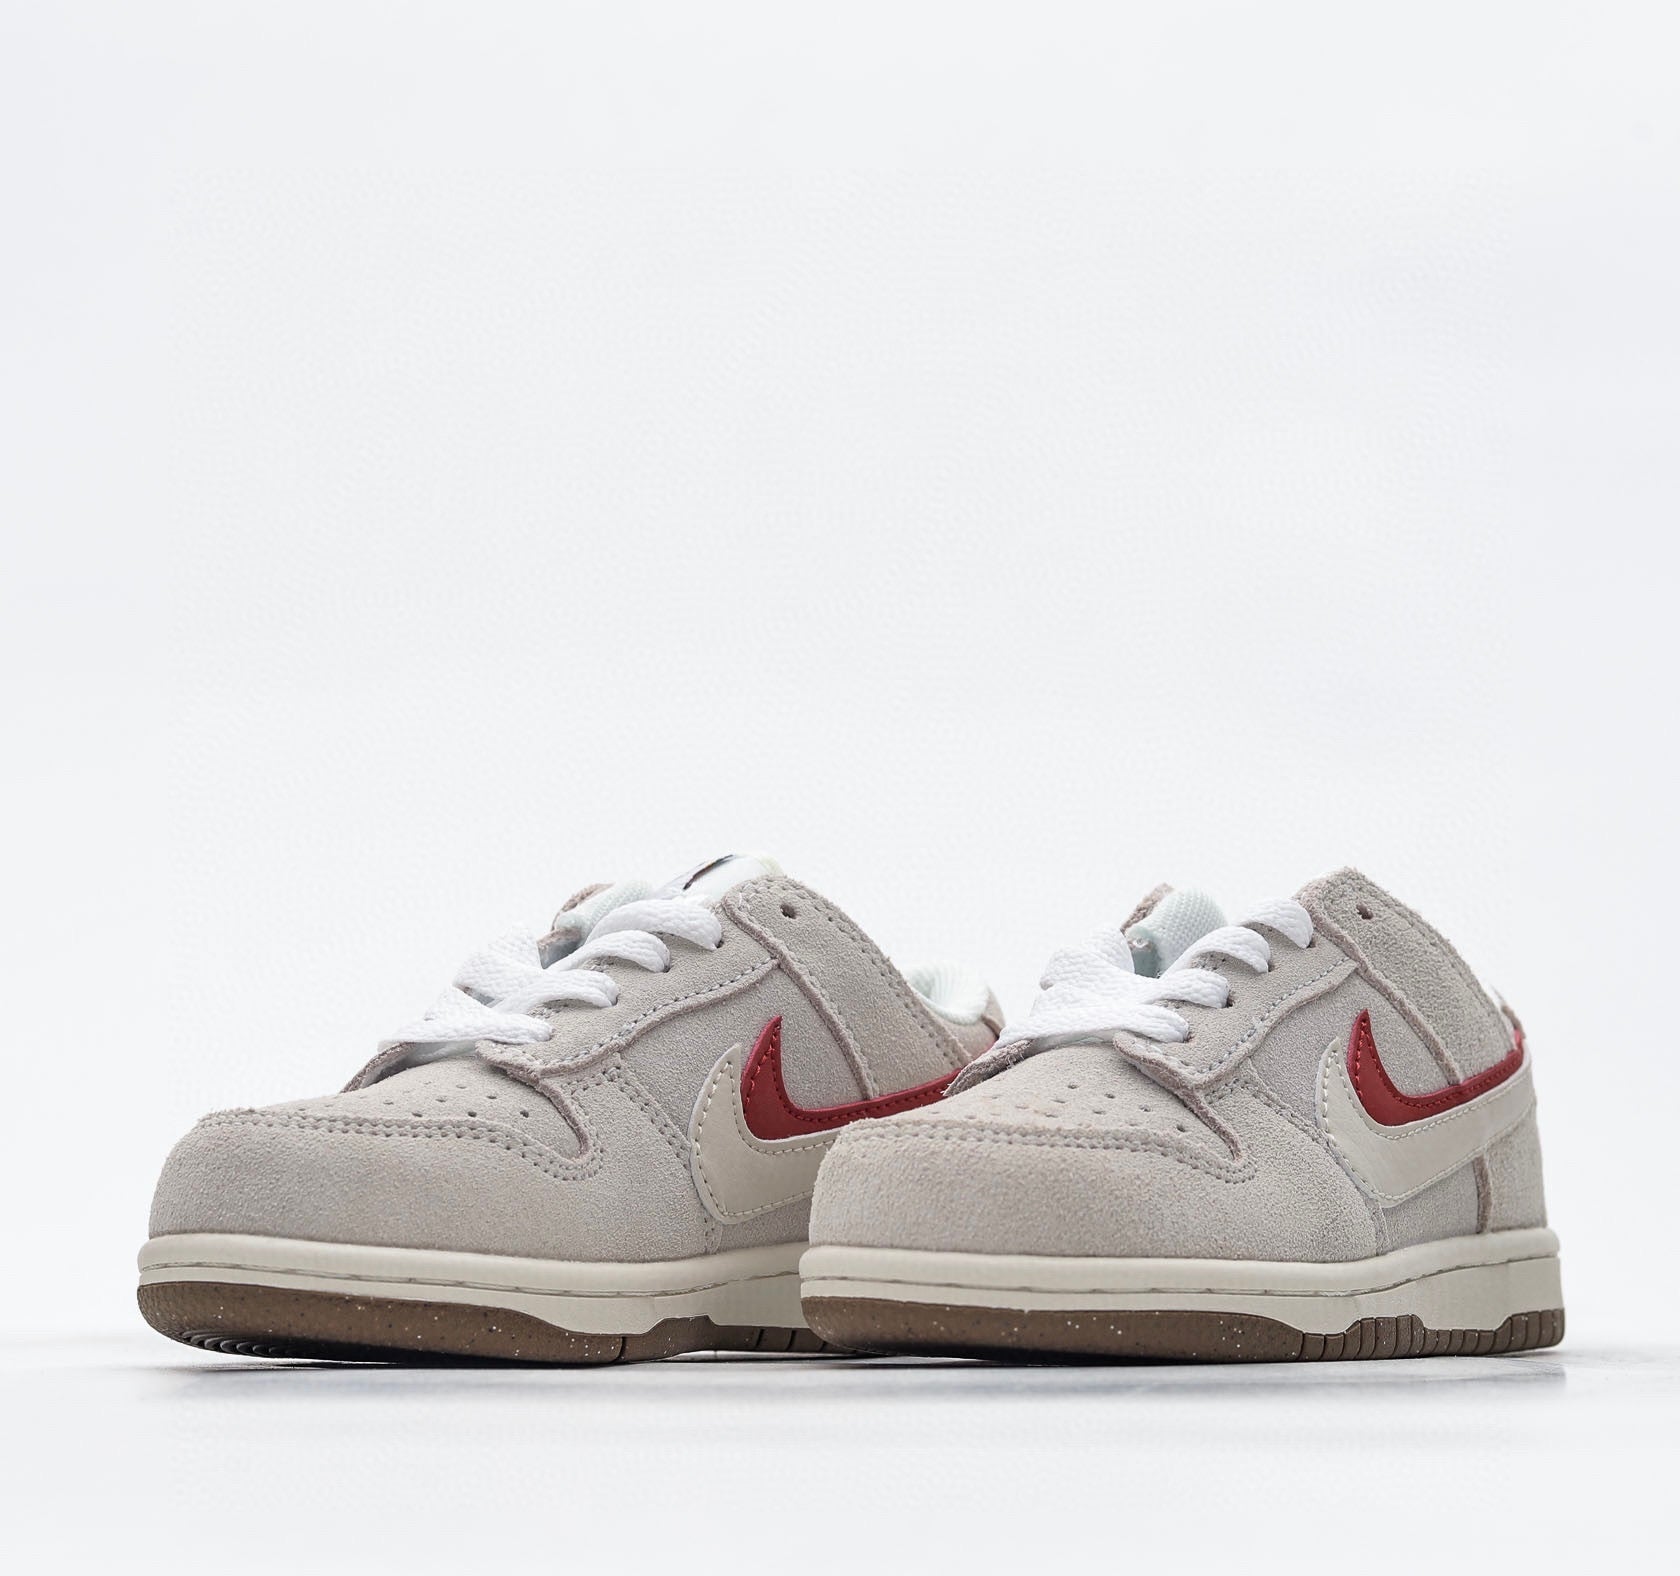 Nike SB grey and red shoes